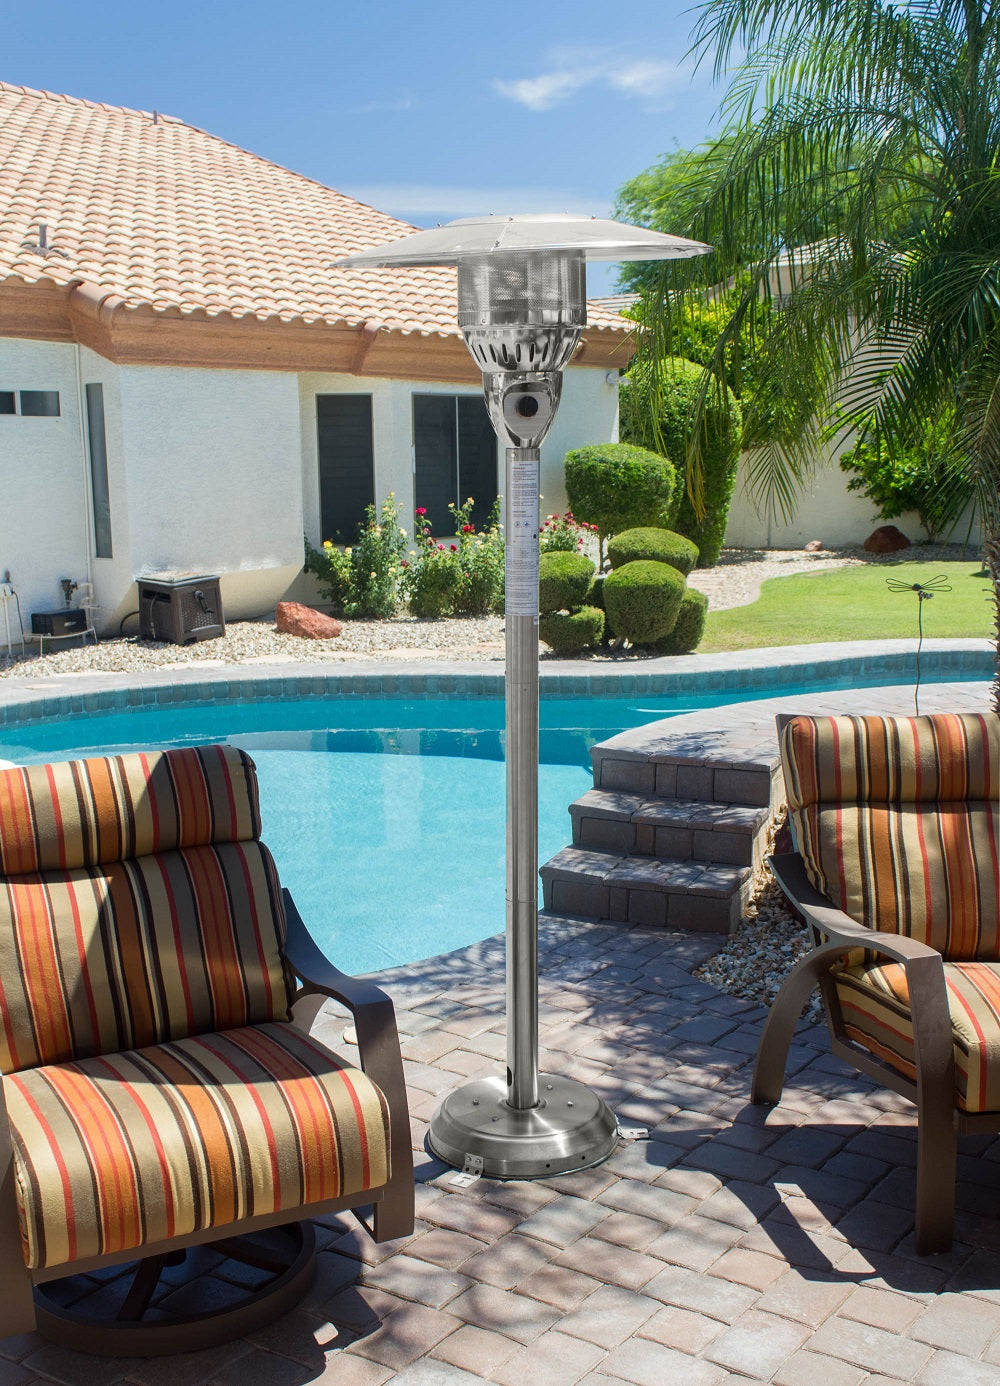 Hiland 85" Natural Gas Outdoor Patio Heater -Stainless Steel-NG-SS- Lifestyle Swimming Pool